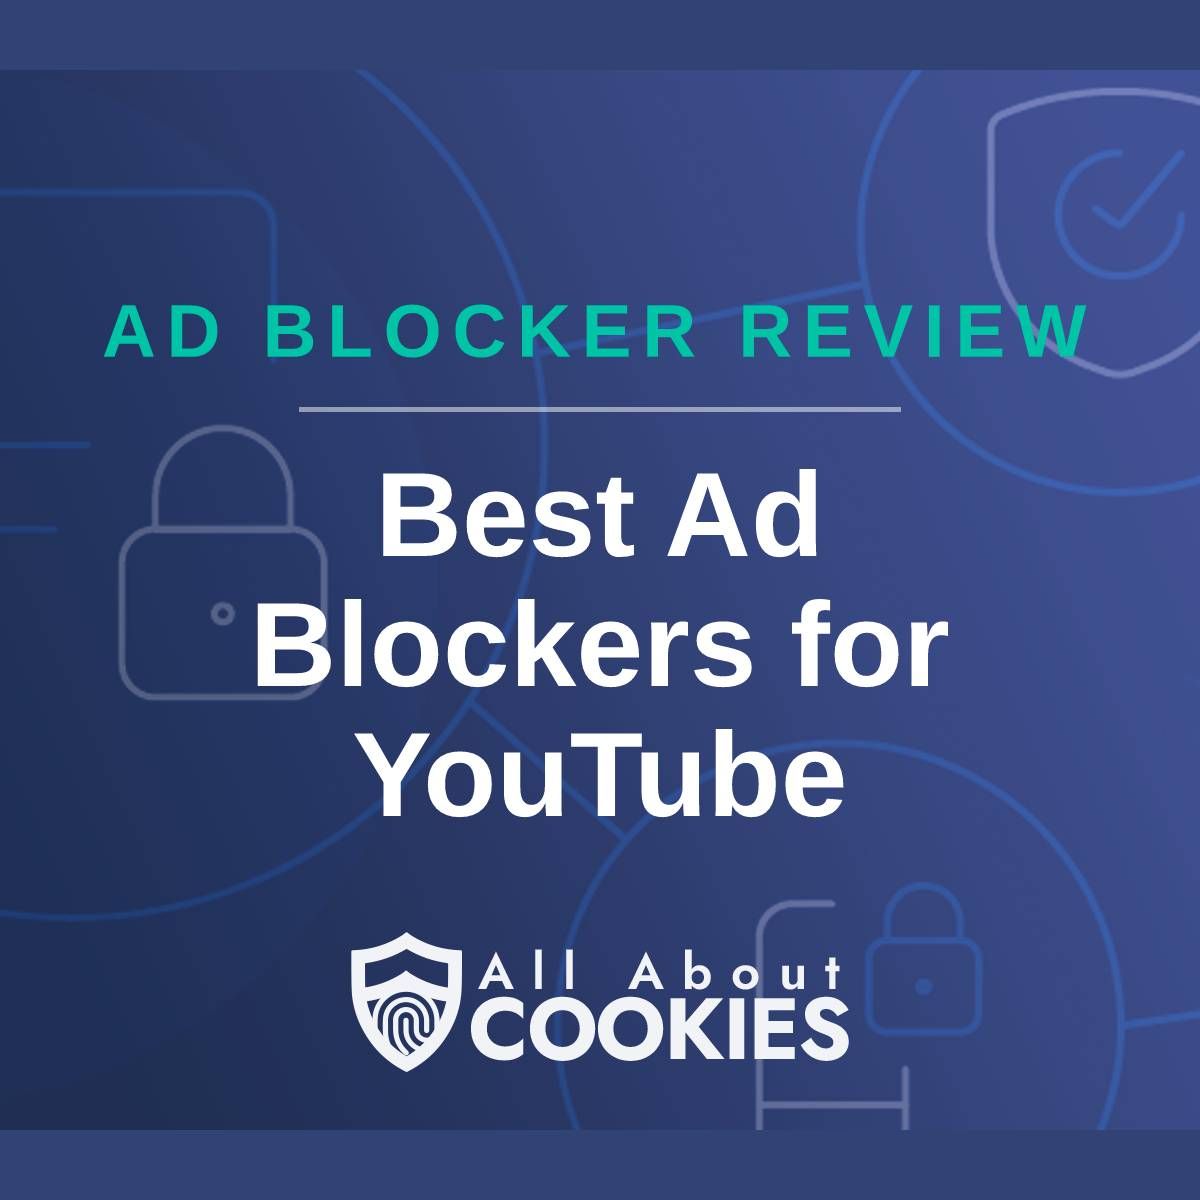 A blue background with images of locks and shields with the text &quot;Ad Blocker Review Best Ad Blockers for YouTube&quot; and the All About Cookies logo. 